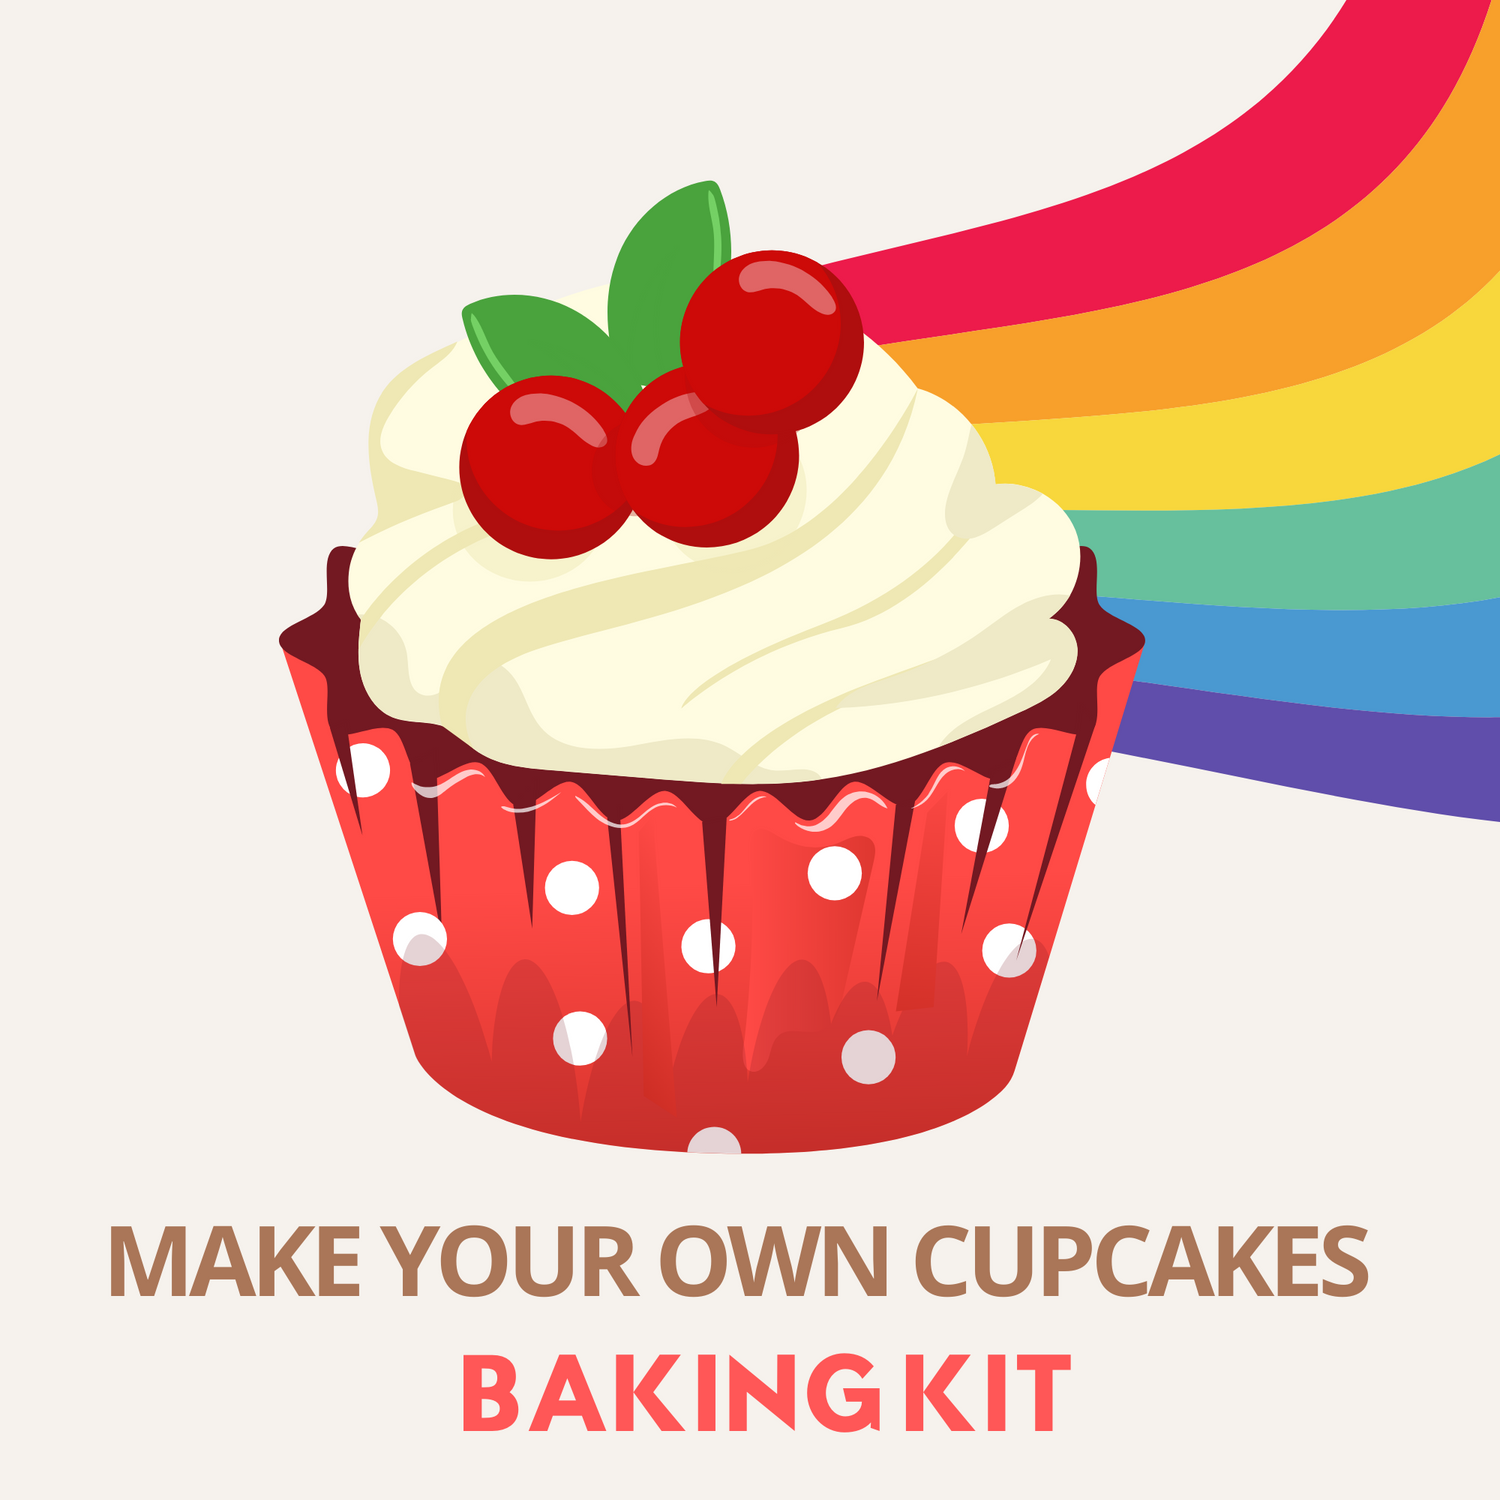 Make your own Cupcakes